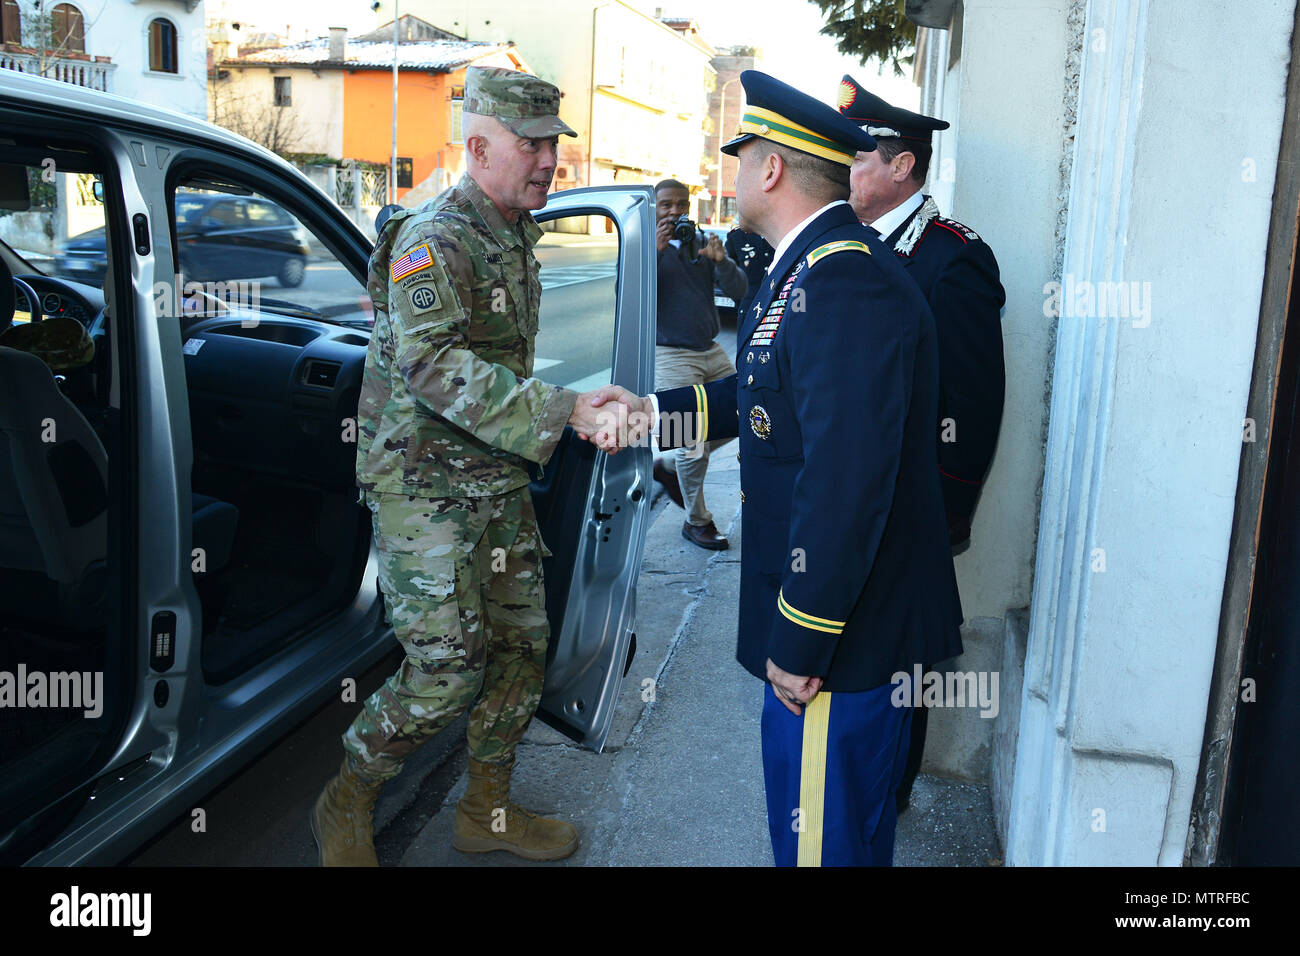 U.S. Army Col. Darius S. Gallegos (right), CoESPU deputy director, welcomes Lt. Gen. Charles D. Luckey (left), Commanding General U.S. Army Reserve Command, during visit at Center of Excellence for Stability Police Units (CoESPU) Vicenza, Italy, January 20, 2017.(U.S. Army Photo by Visual Information Specialist Paolo Bovo/released) Stock Photo